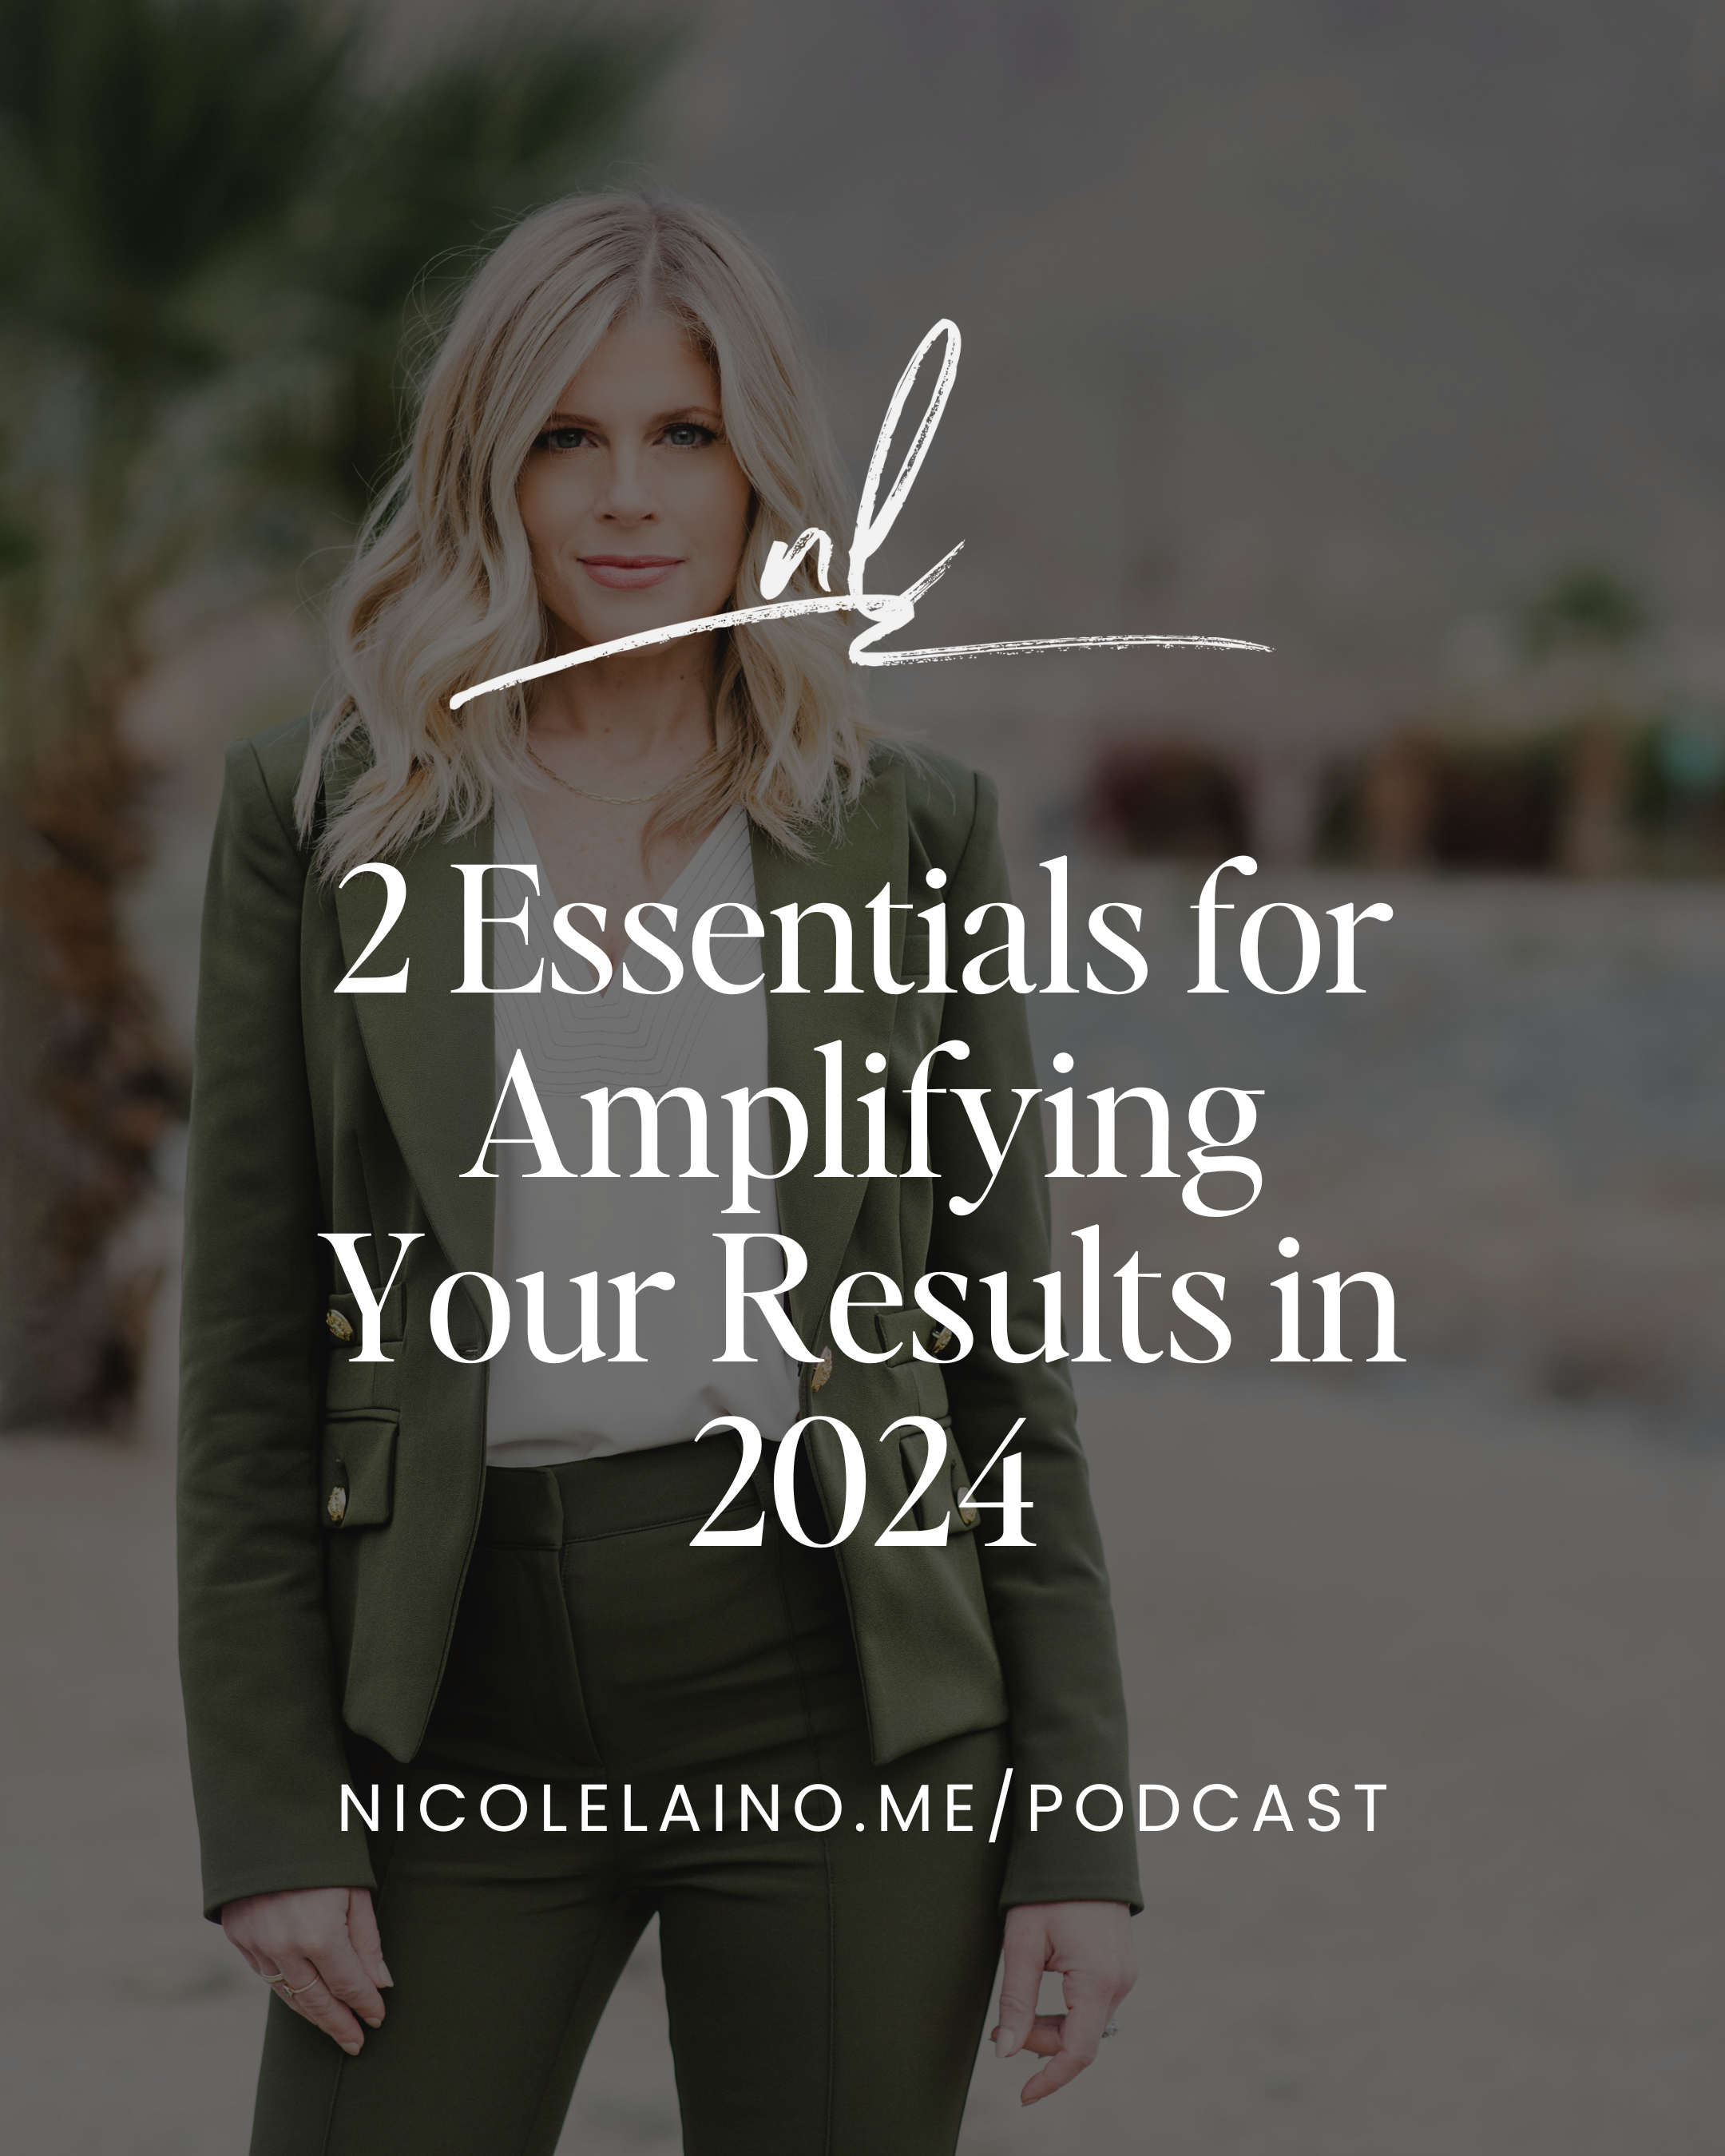 2 Essentials for Amplifying Your Results in 2024